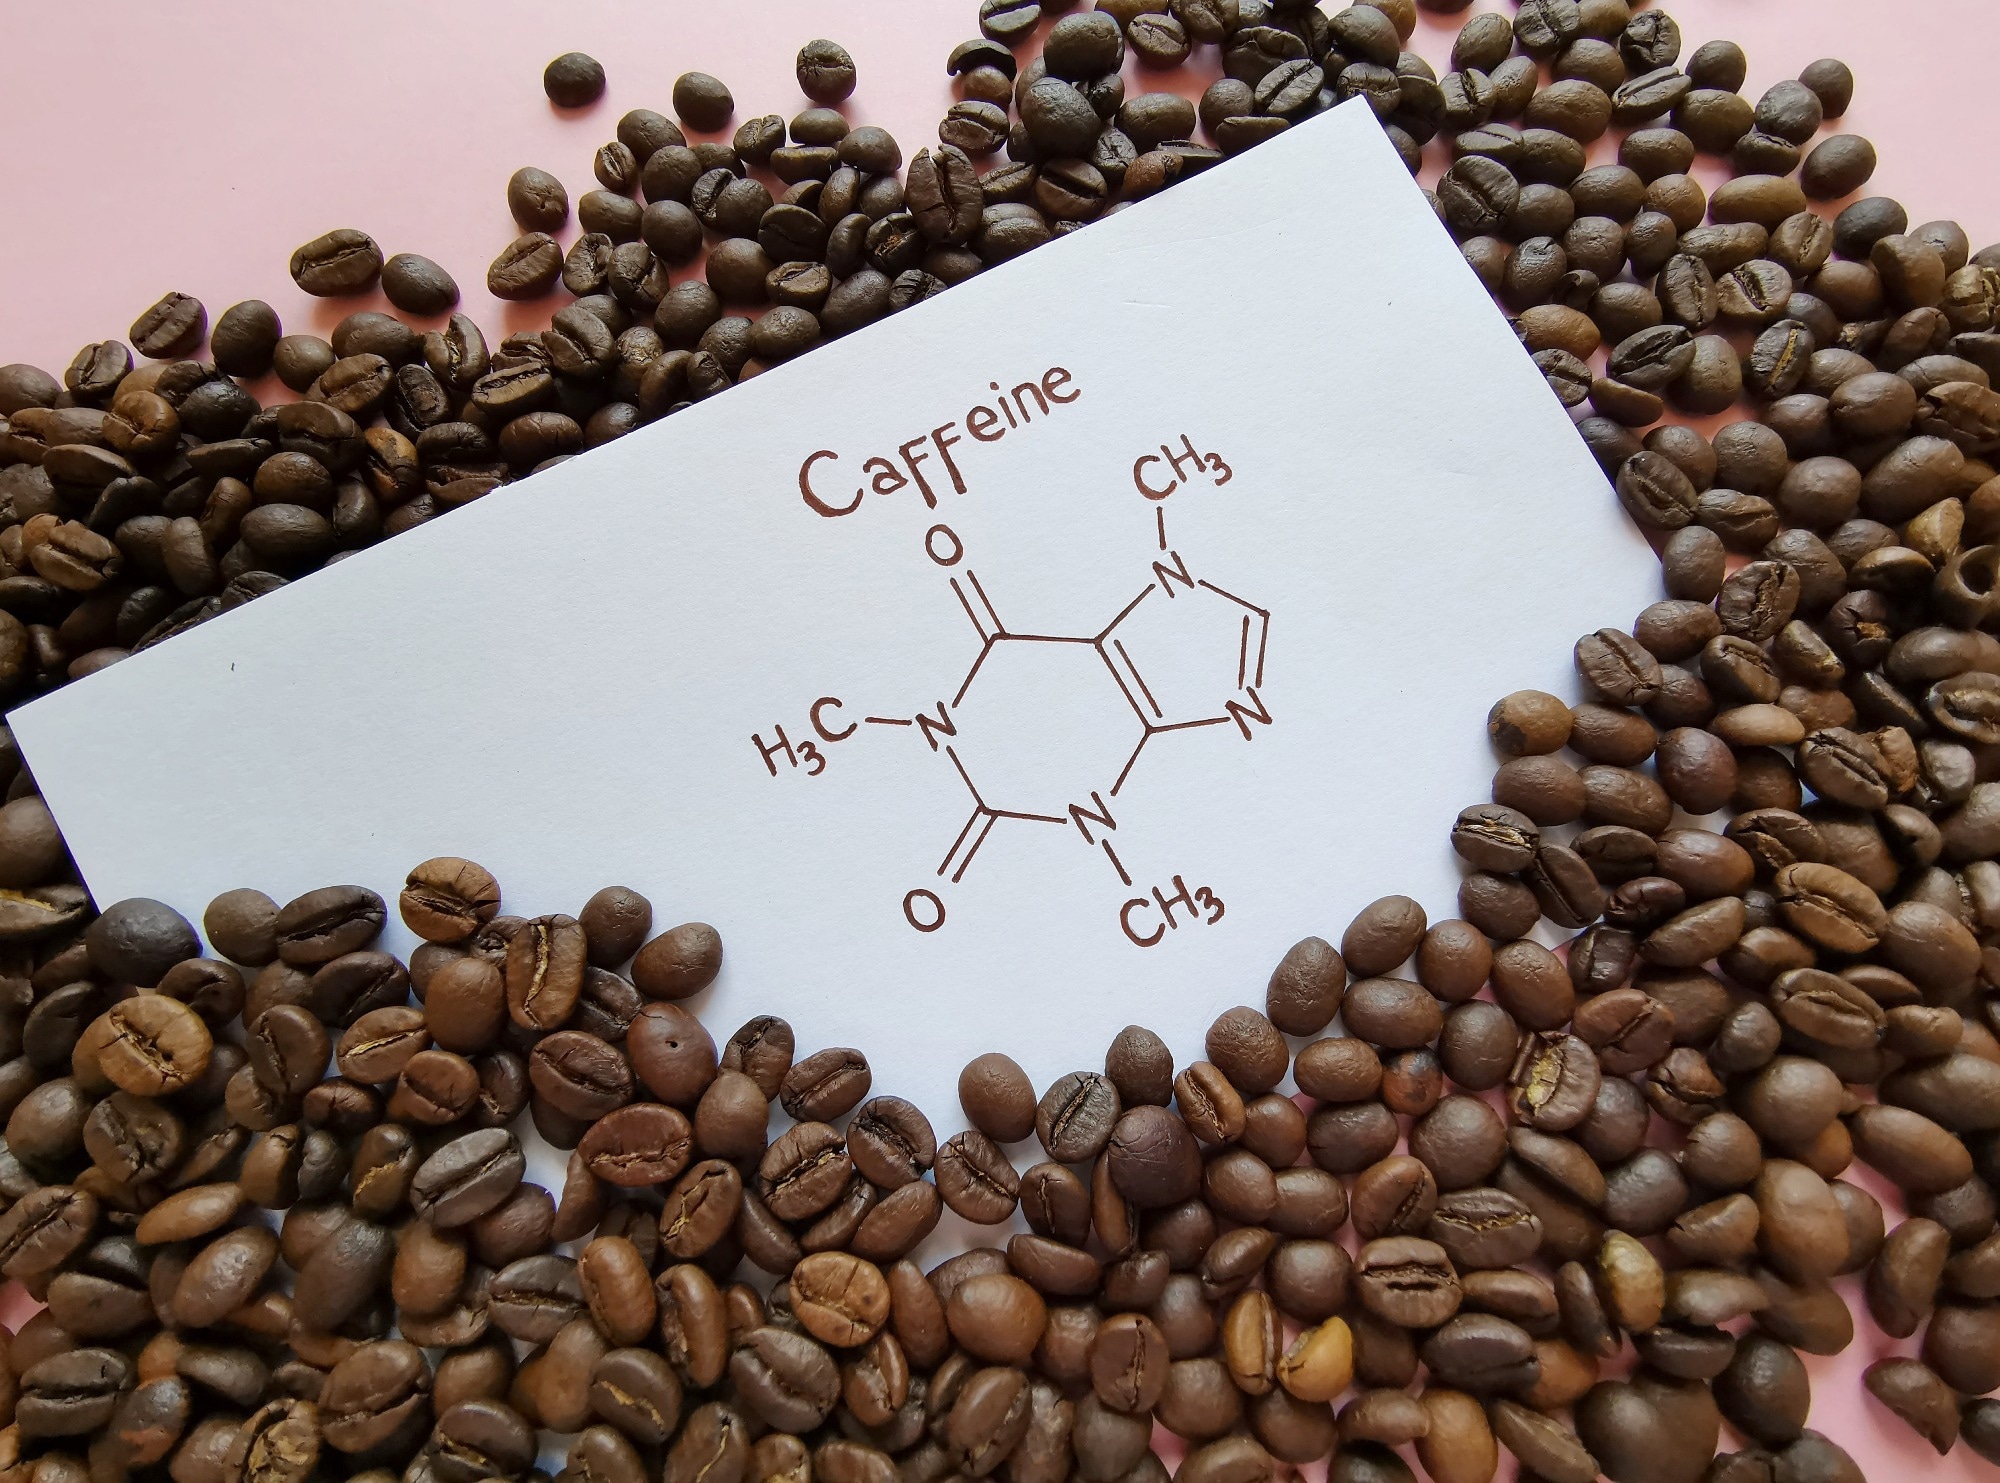 Study: Caffeine intake interacts with Asian gene variants in Parkinson